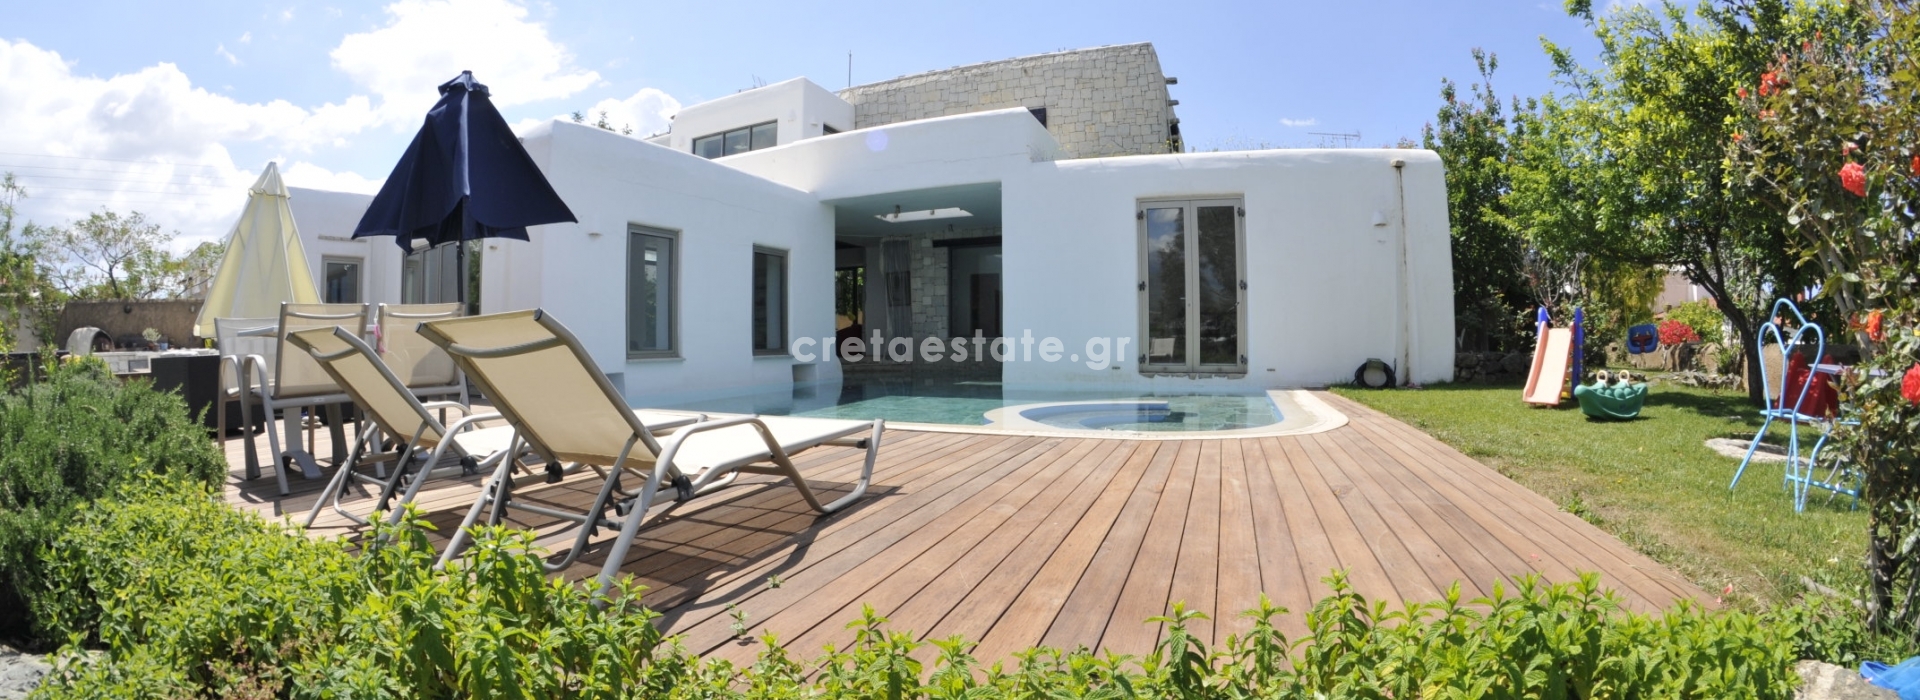 DETACHED HOUSE FOR SALE IN VOROI